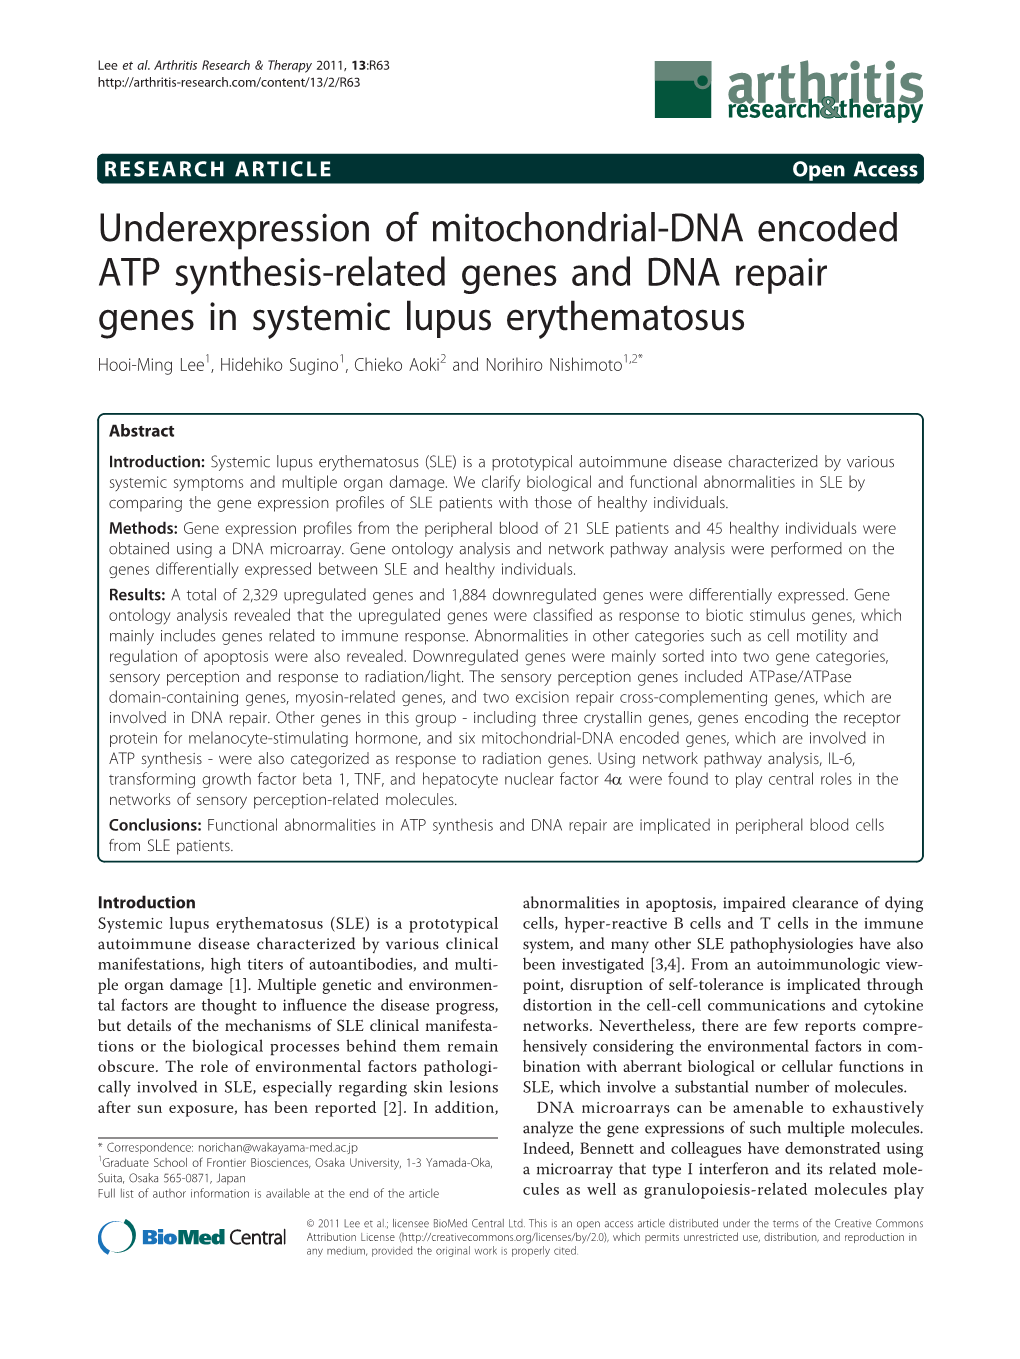 Underexpression of Mitochondrial-DNA Encoded ATP Synthesis-Related Genes and DNA Repair Genes in Systemic Lupus Erythematosus